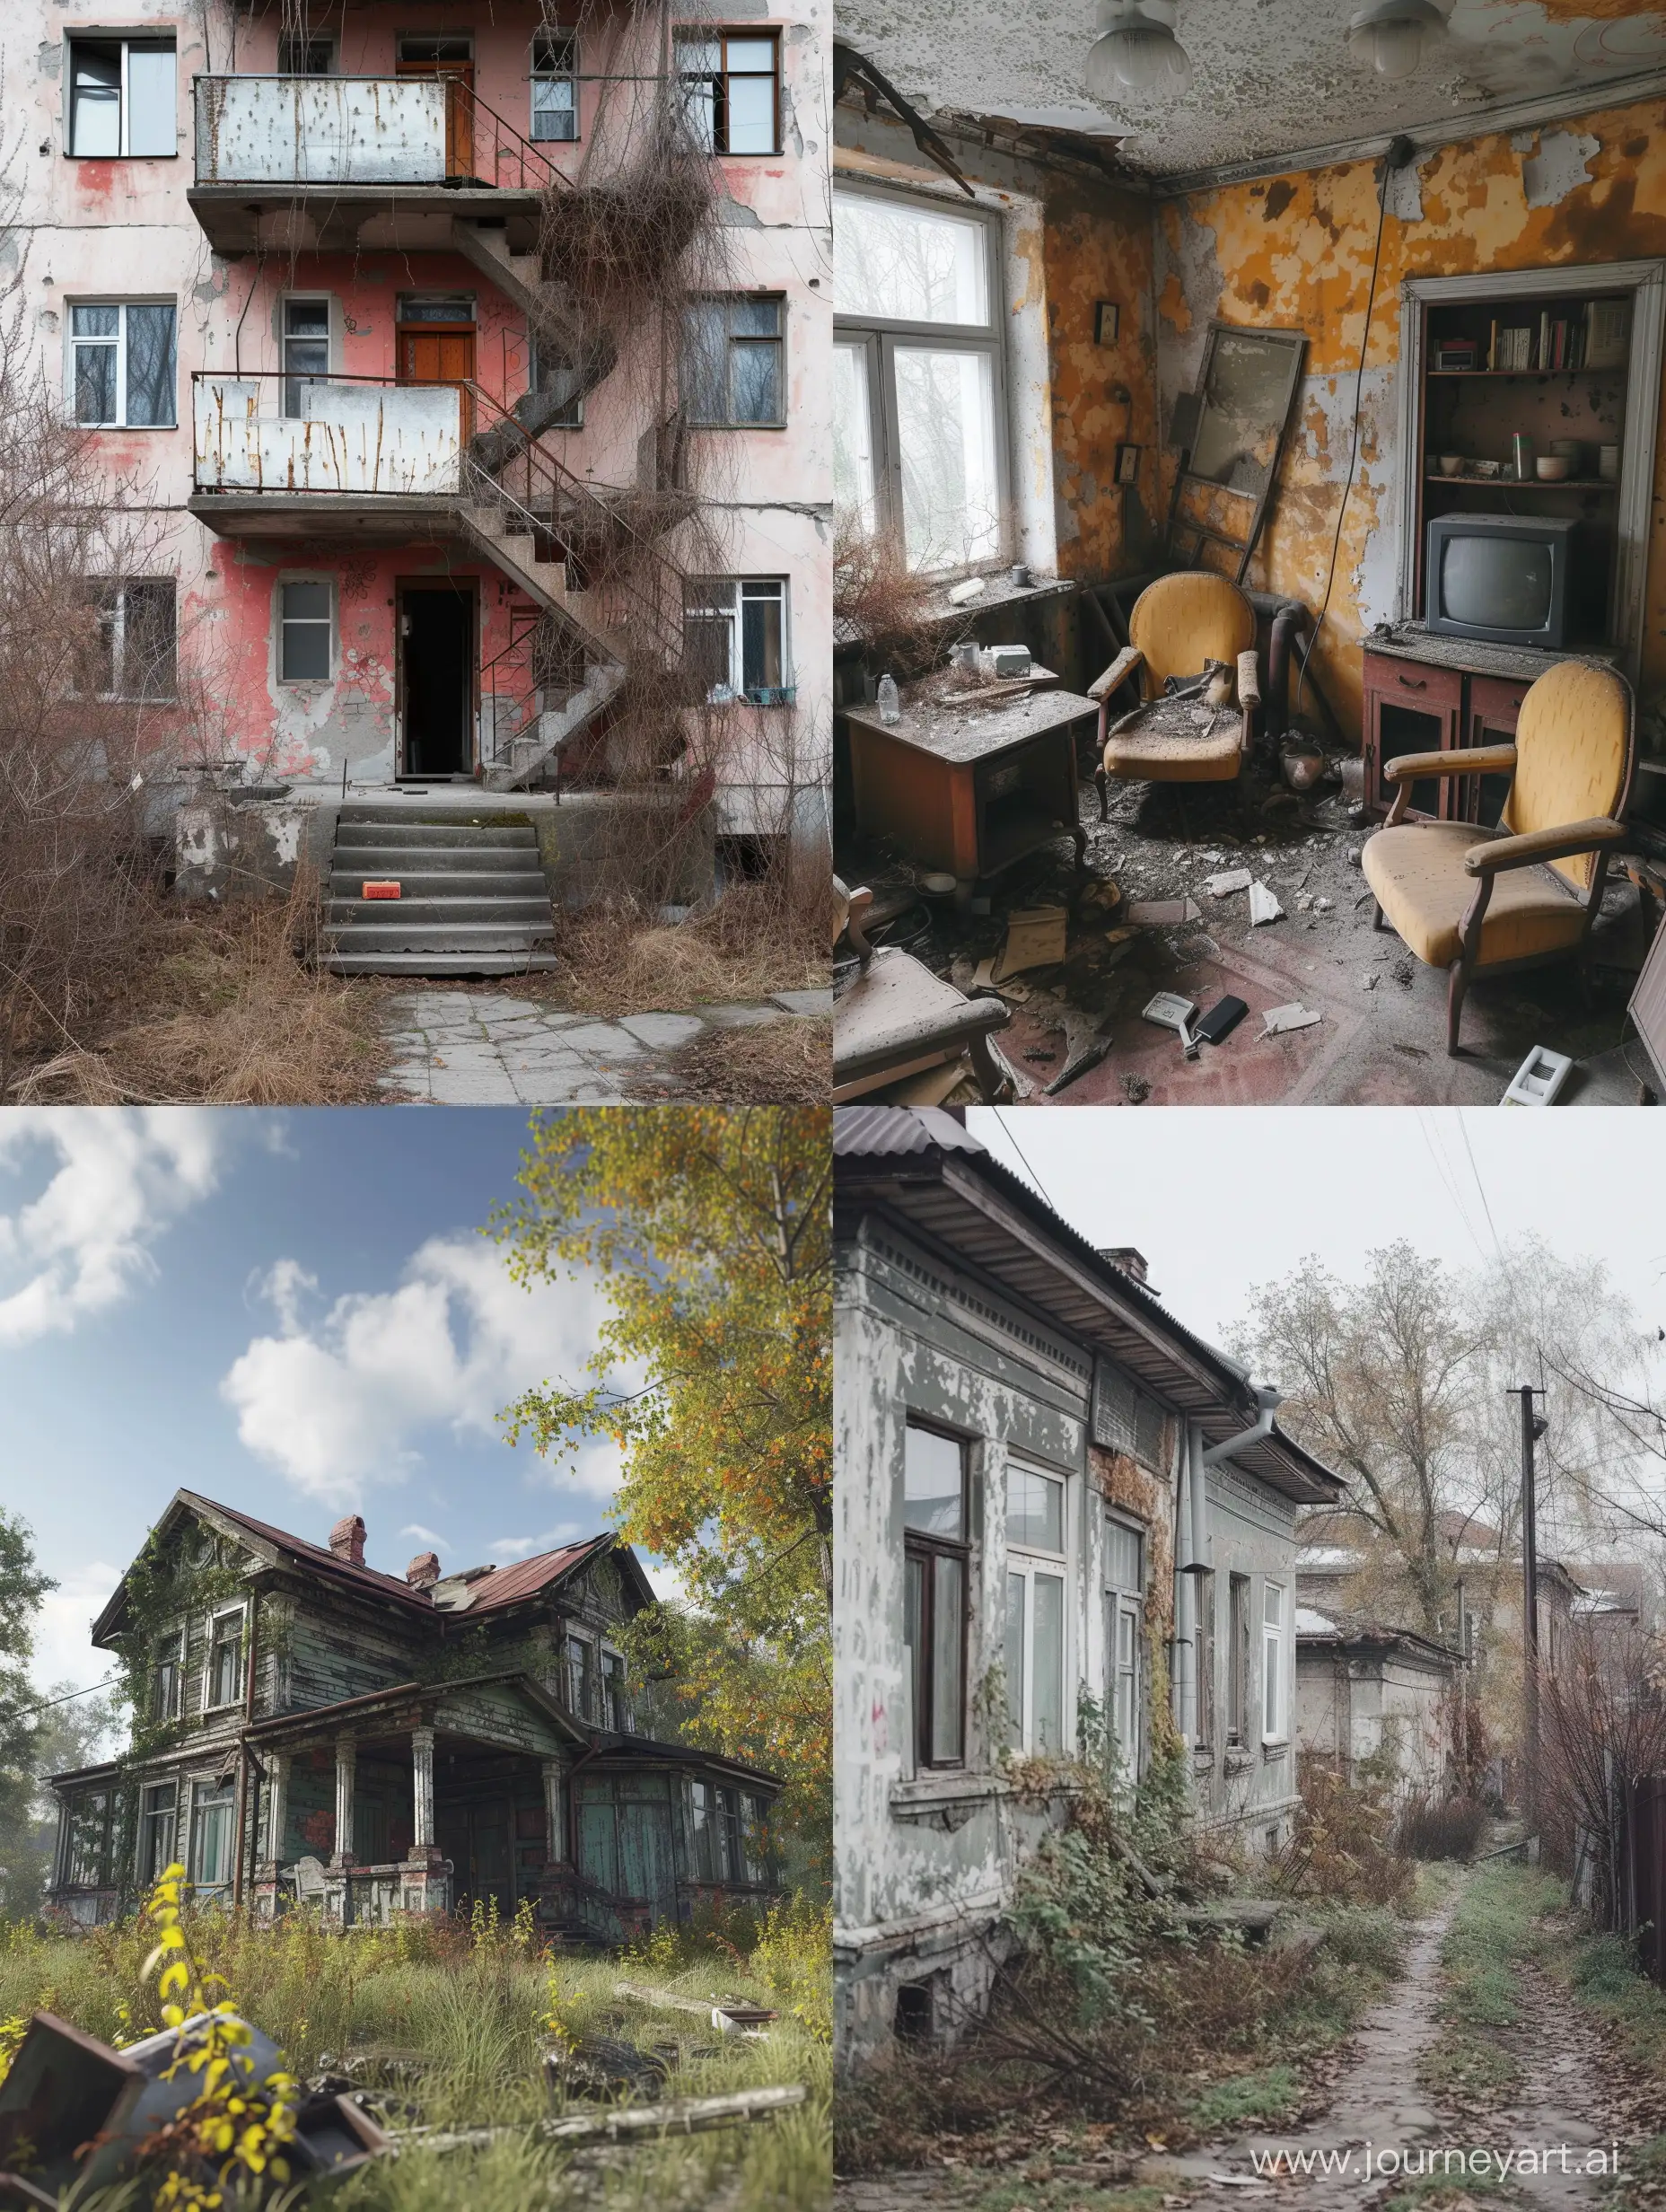 There are many Russian depressive houses of the 80s .